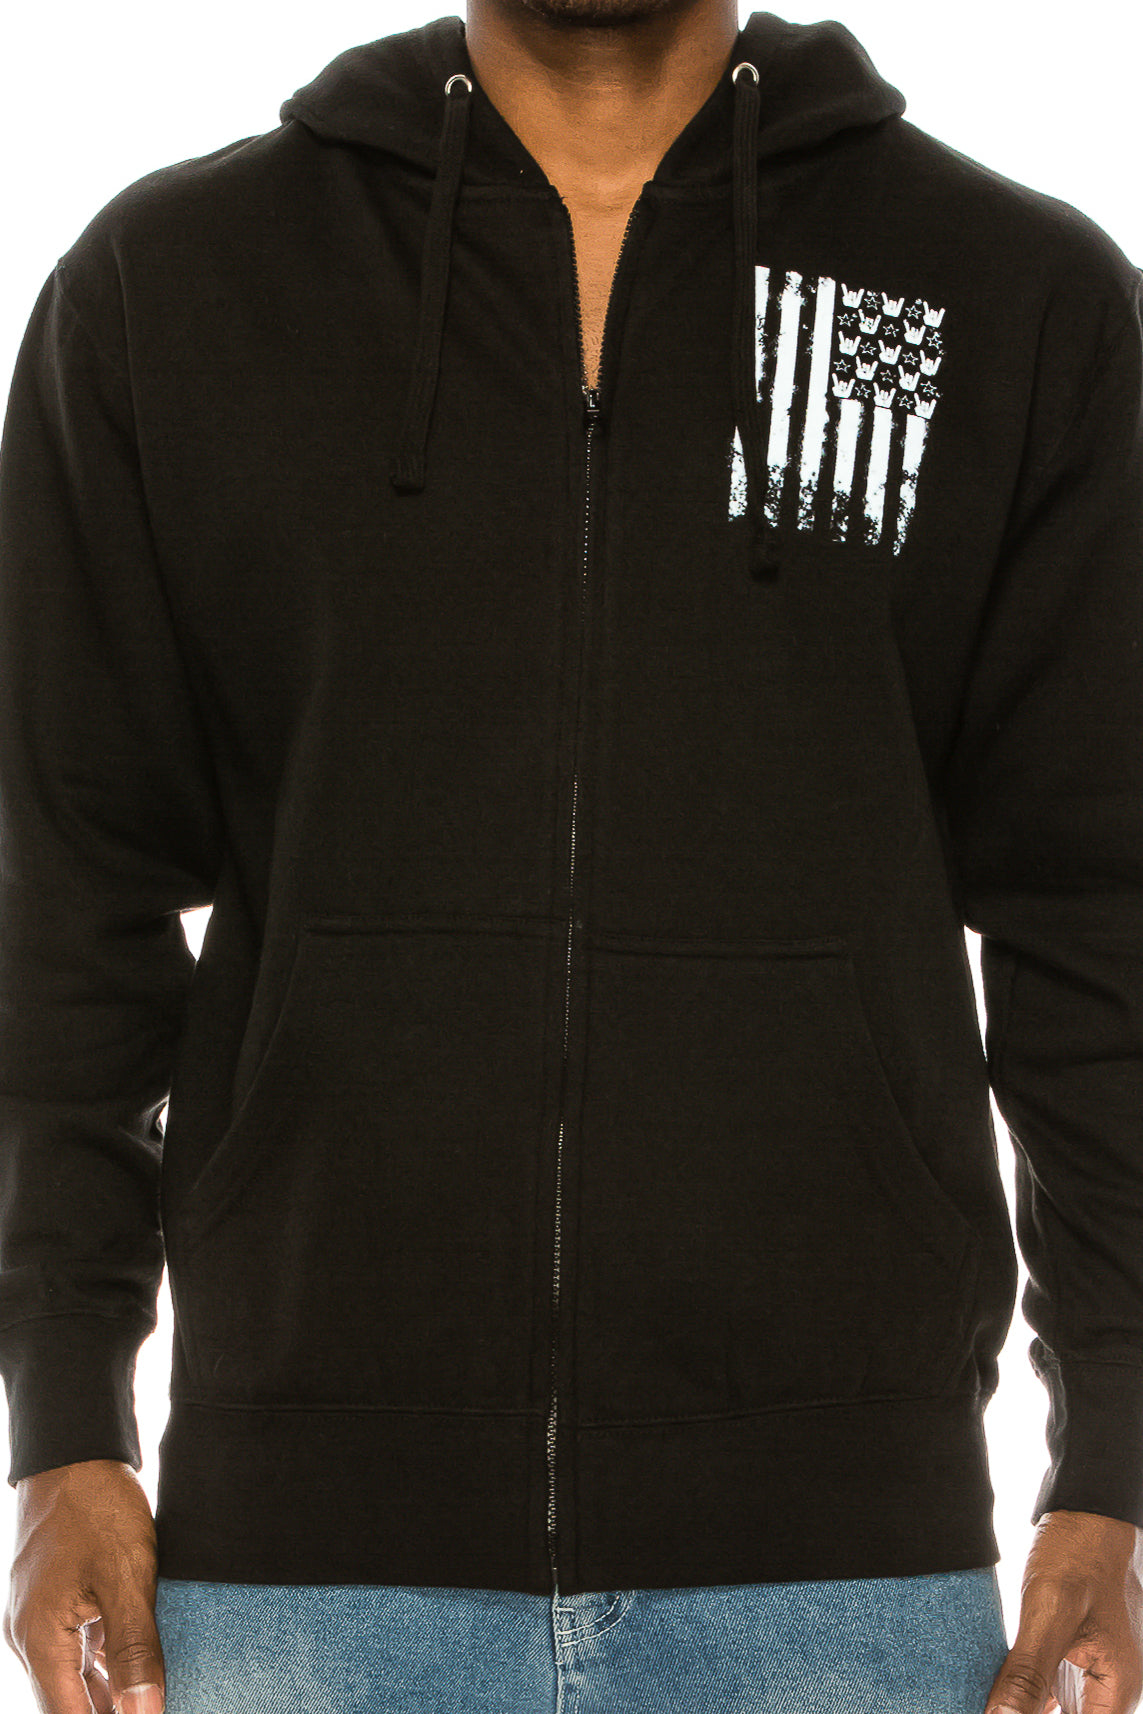 FLAG HANDS AND STRIPES HOODIE ZIP UP - Trailsclothing.com